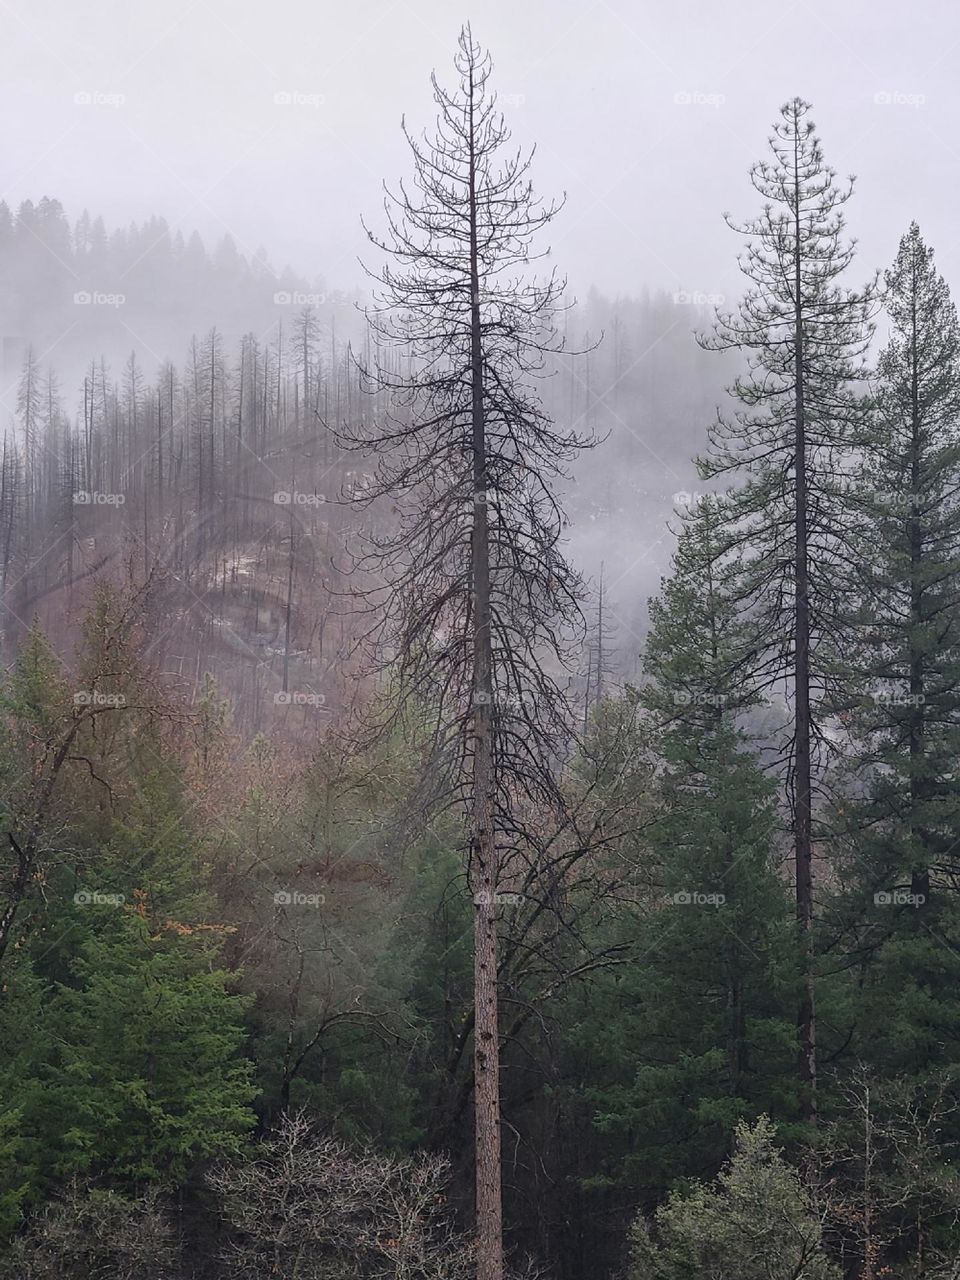 California morning in the forest, after the wildfires